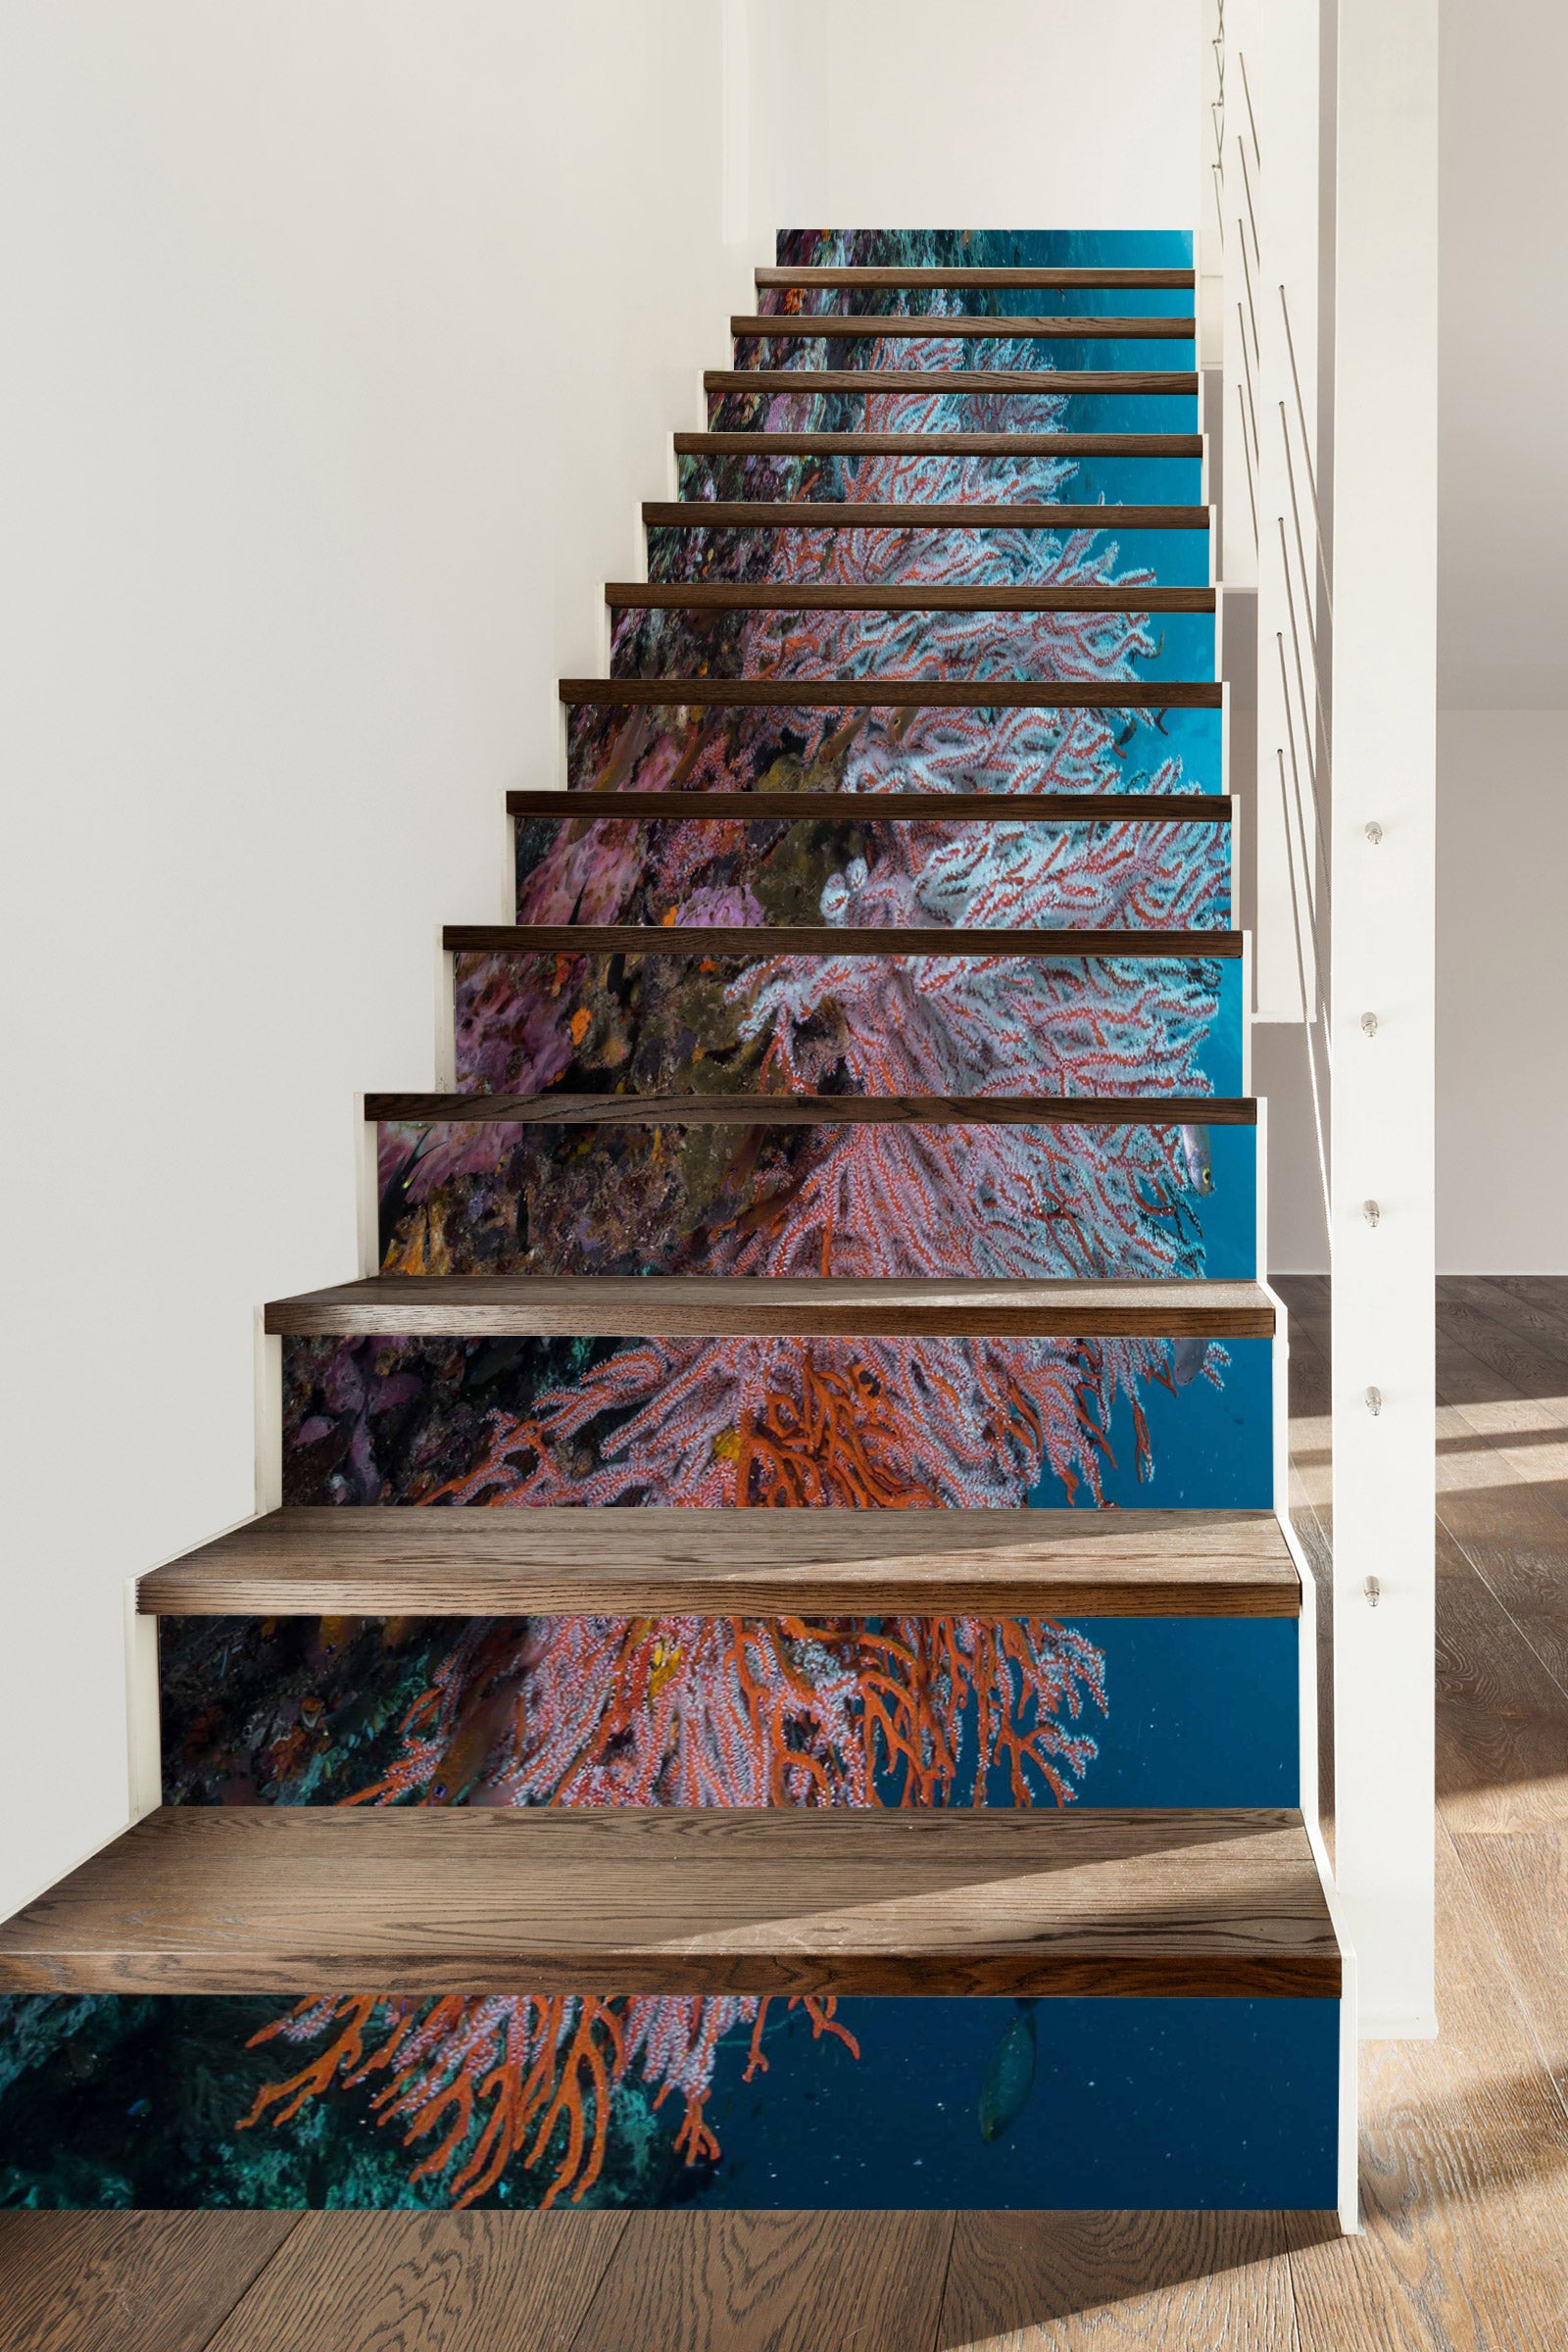 3D Sea Creatures 459 Stair Risers